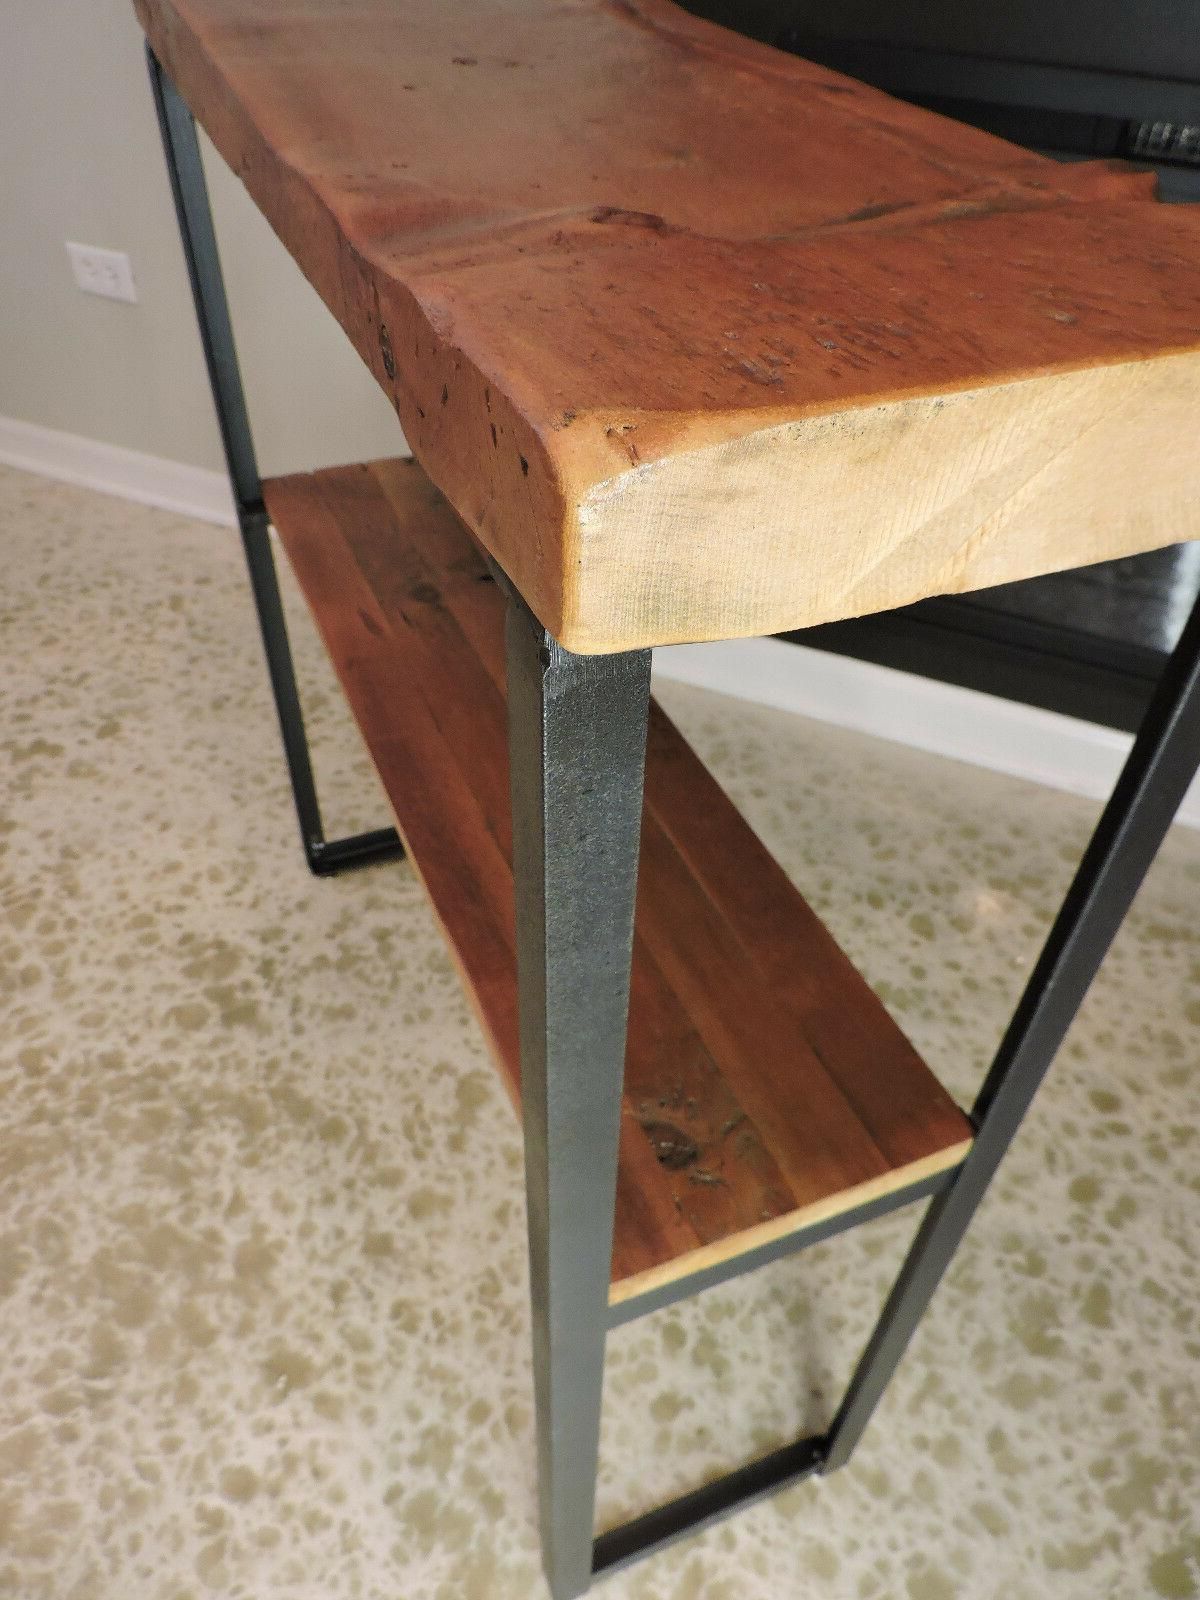 Barn Wood Console Table, Uniquely Worn Rustic Top, Pertaining To Rustic Barnside Console Tables (View 19 of 20)